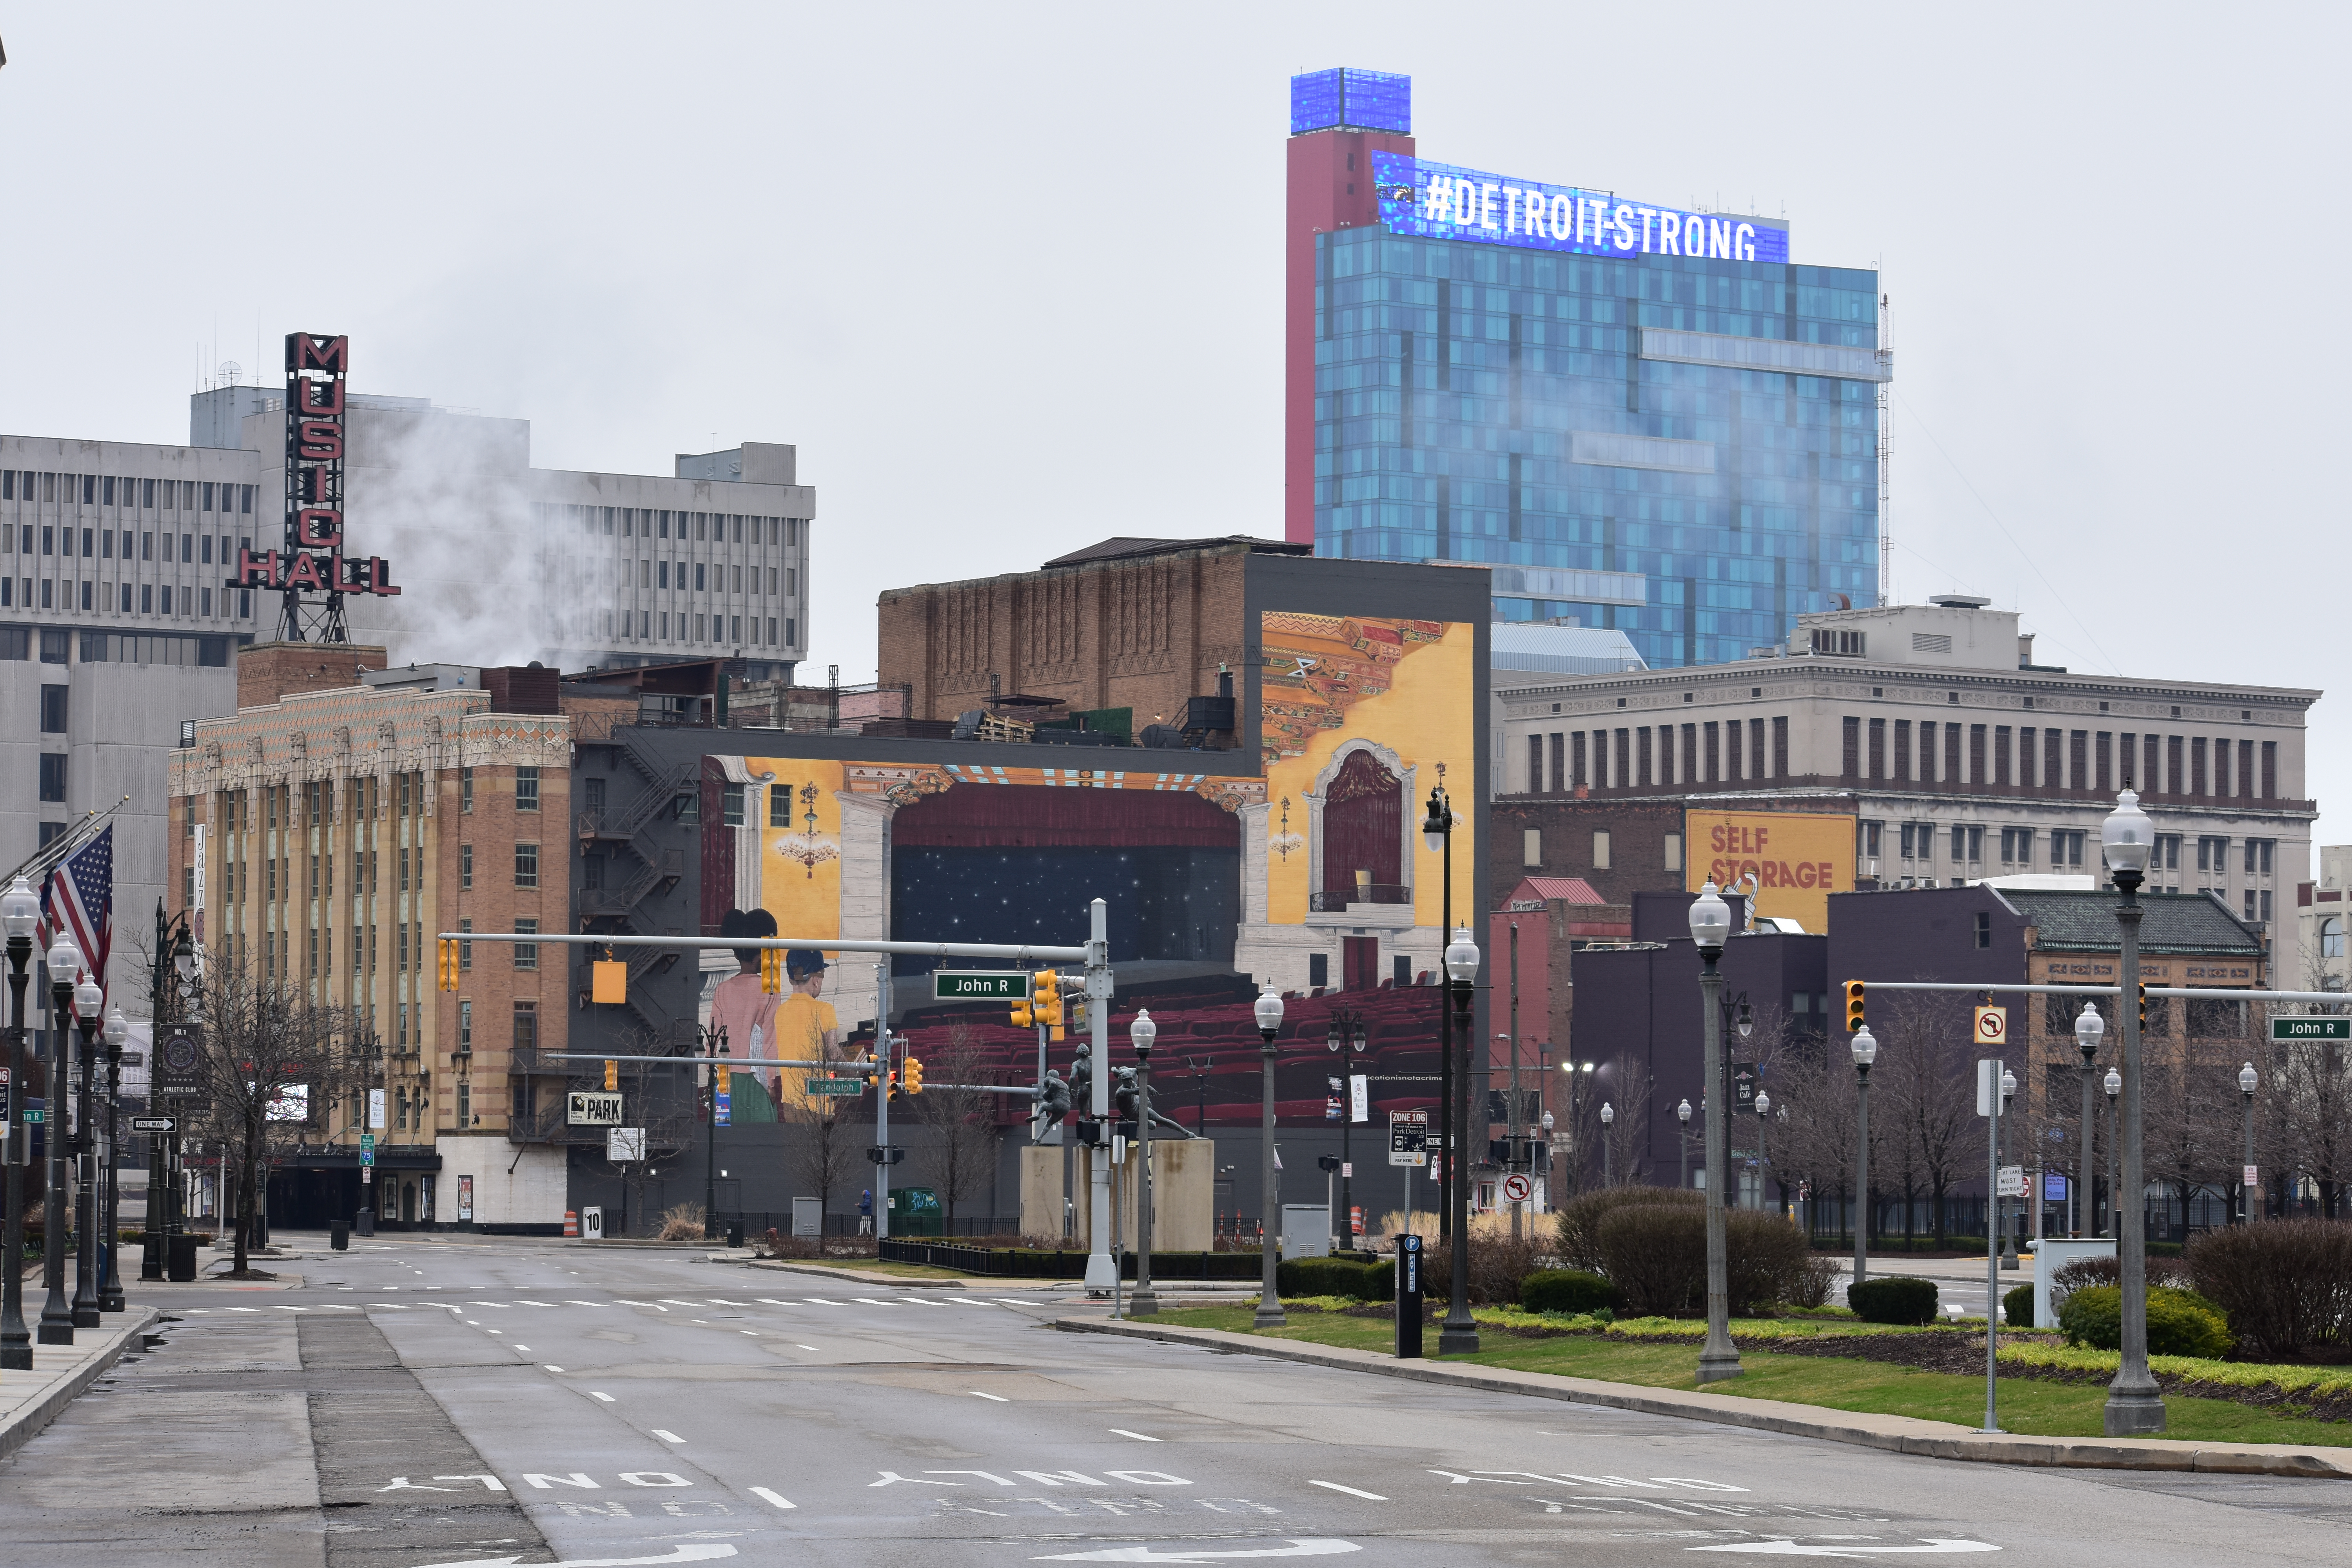 Madison Street and John R Street, with #Detroit-Strong displayed atop the Greektown Casino-Hotel in the background